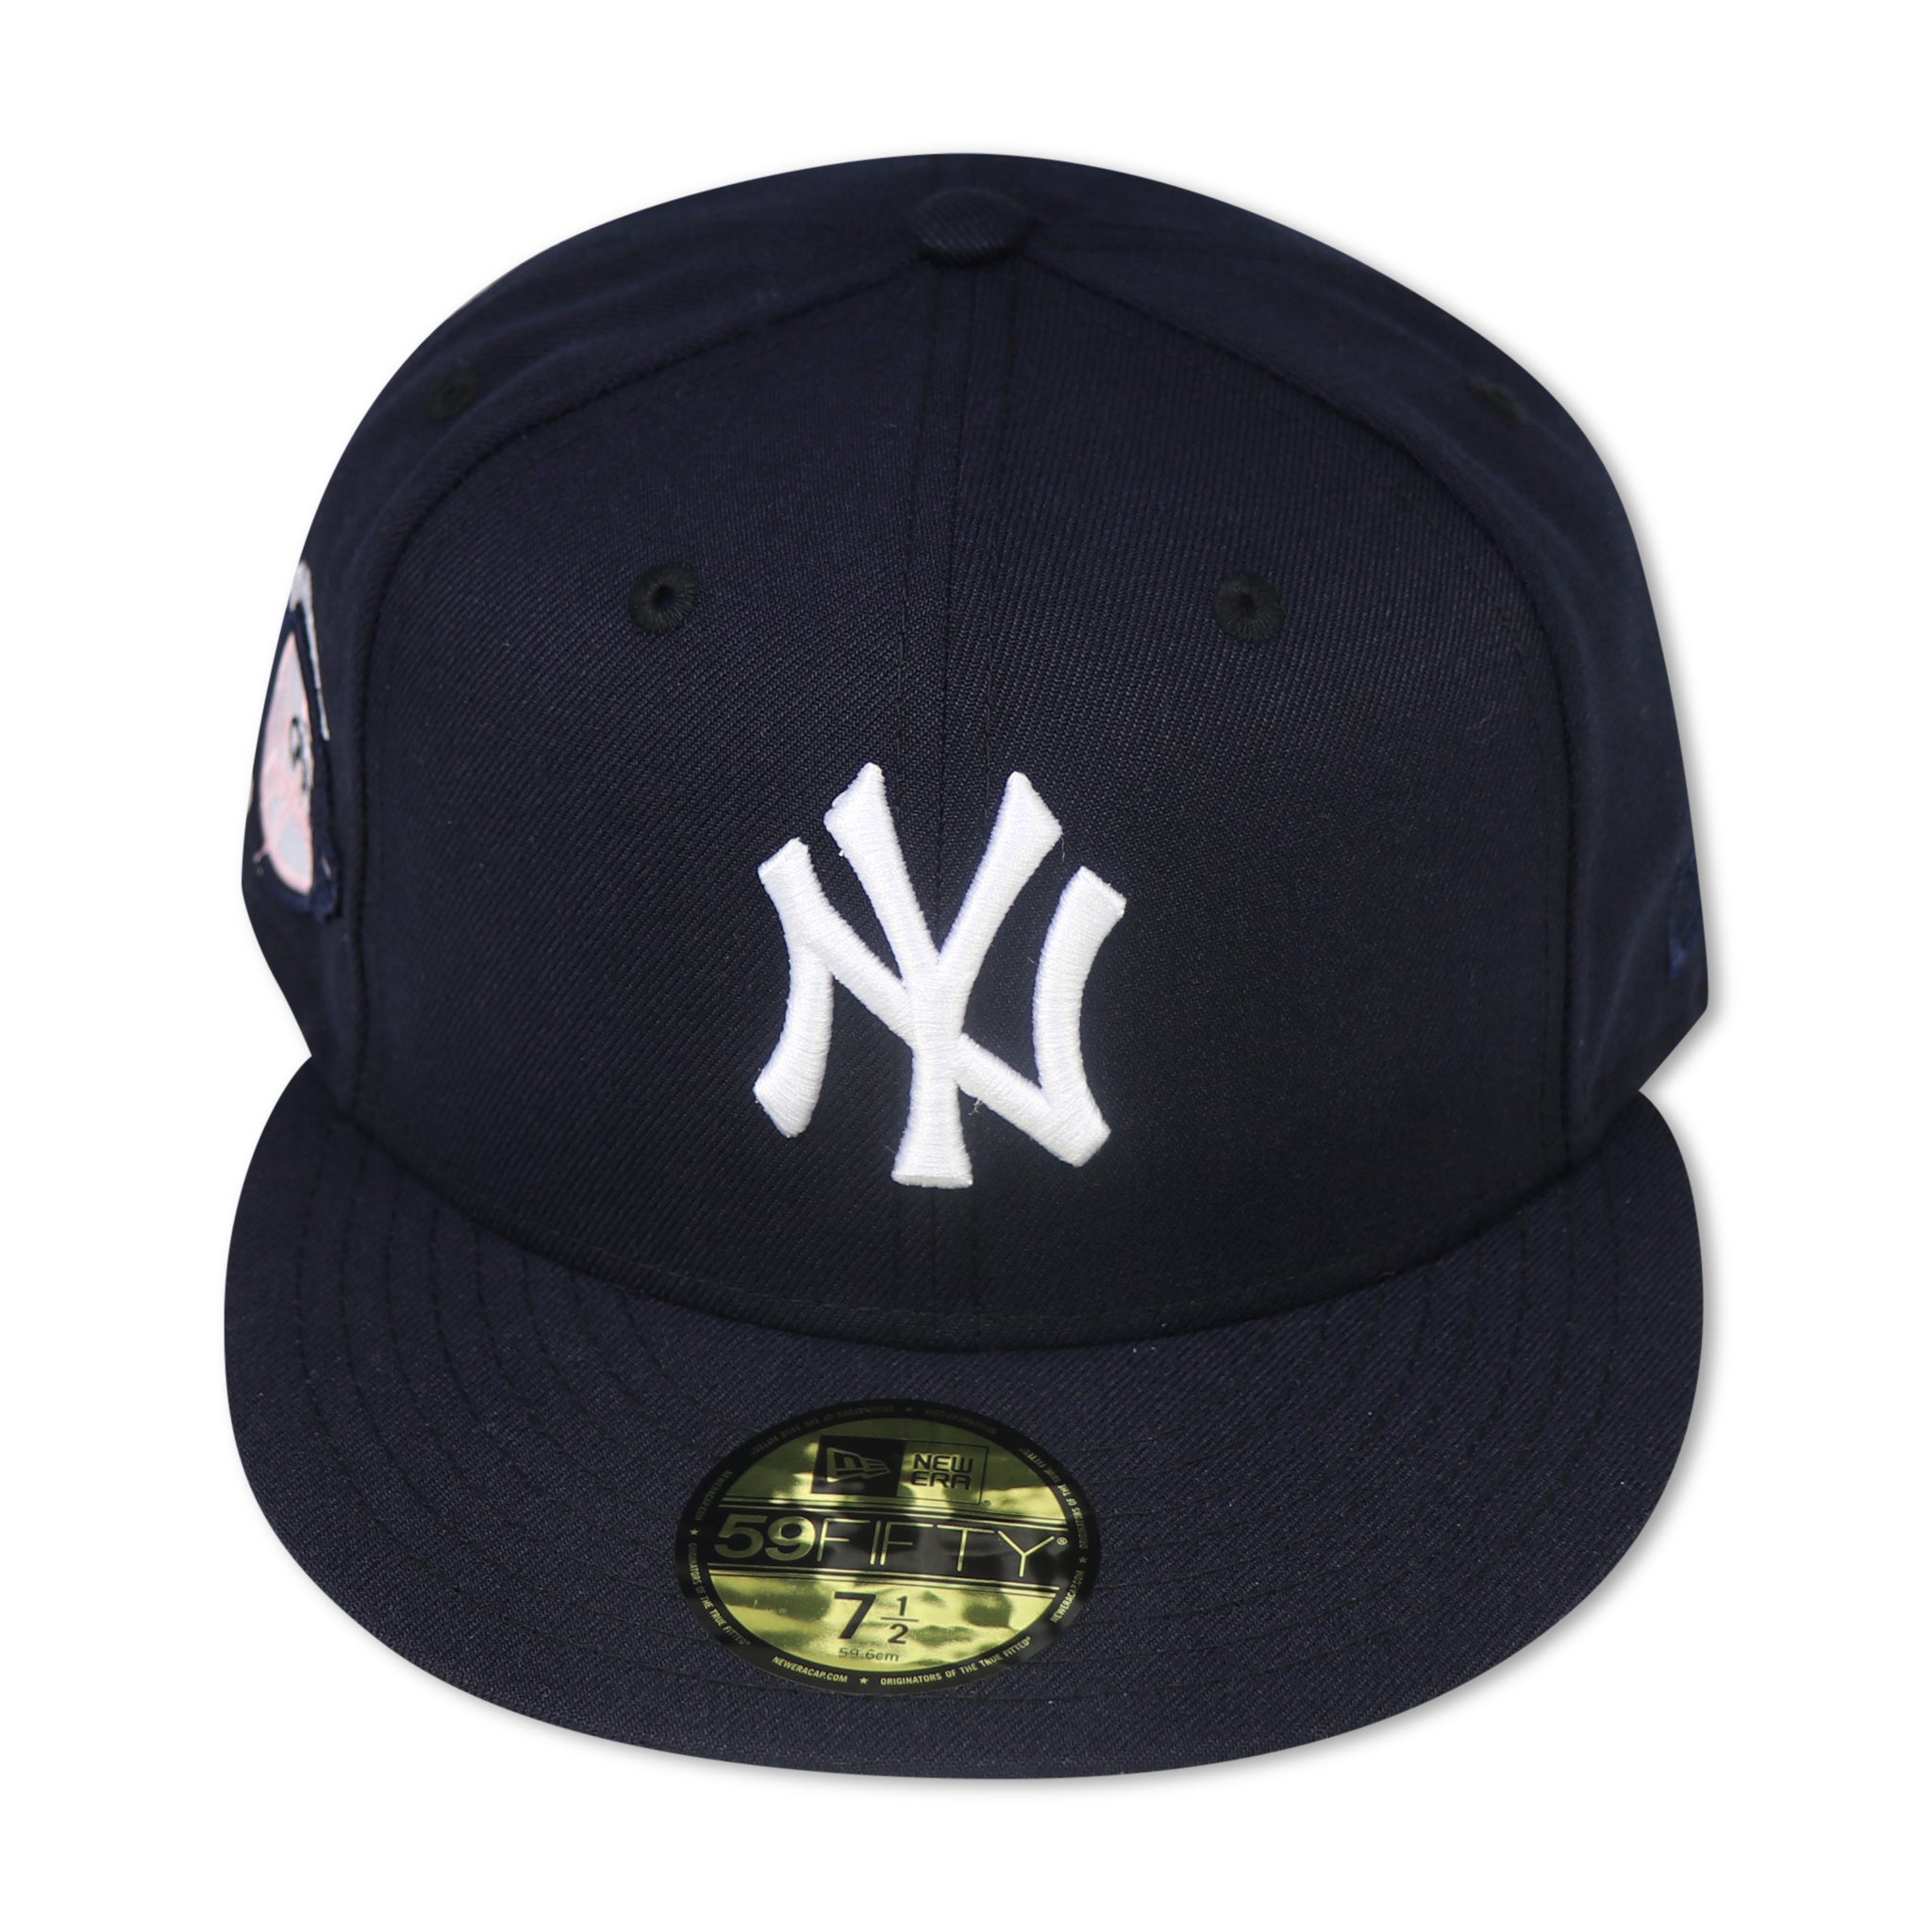 NEW YORK YANKEES "100TH ANNIVERSARY" “PINK BOTTOM” NEW ERA 59FIFTY FITTED